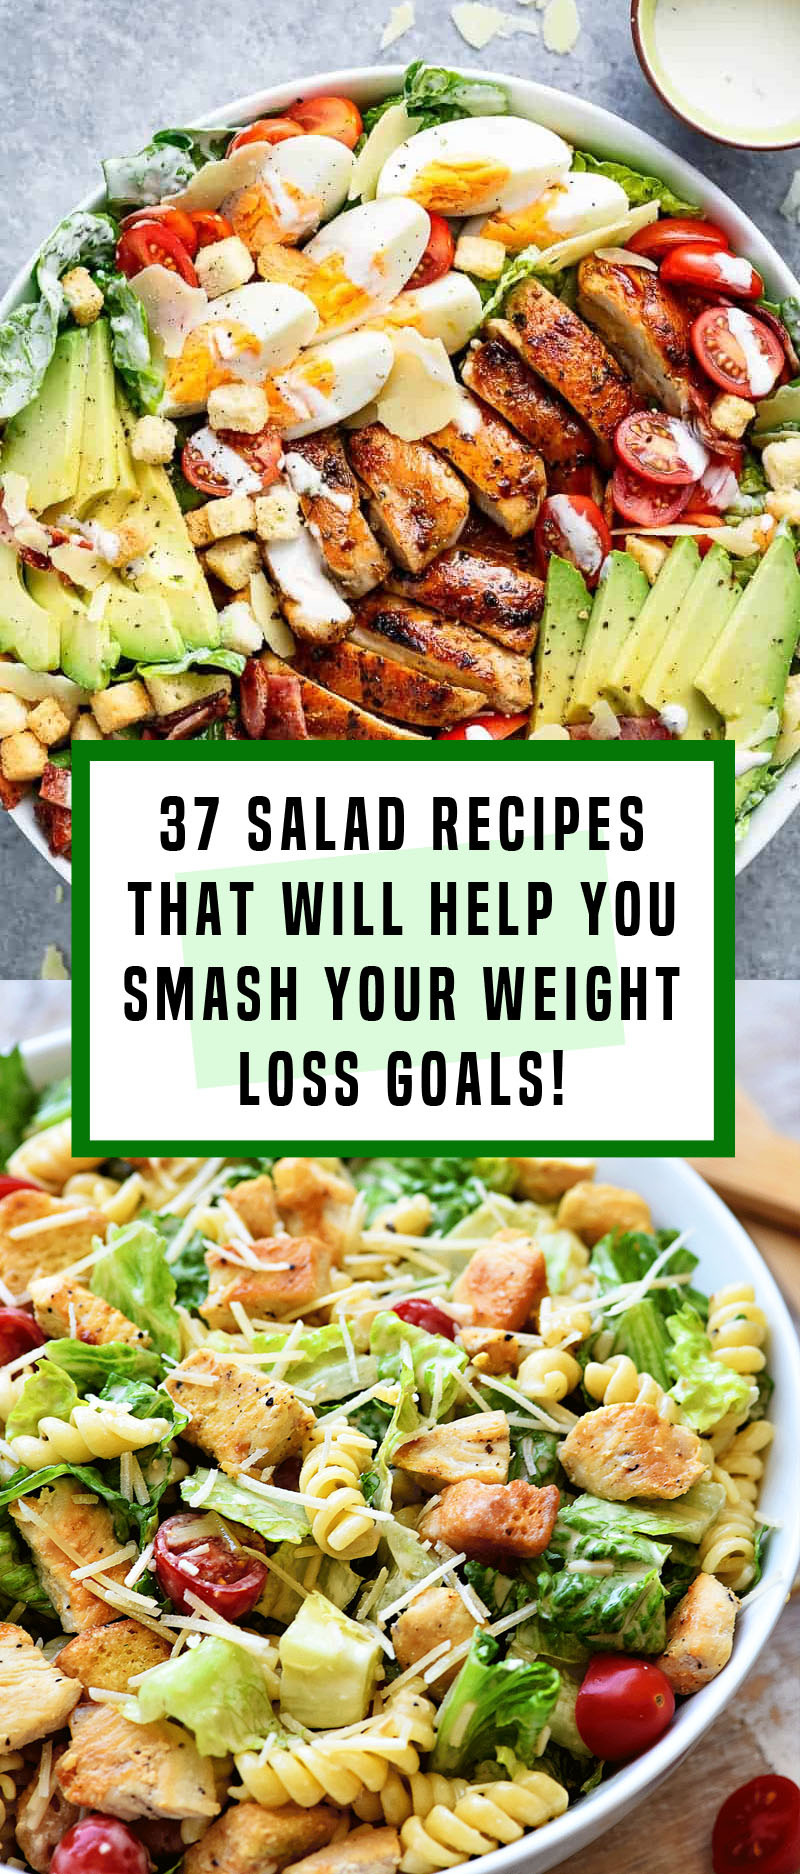 37 Salad Recipes That Will Help You Smash Your Weight Loss Goals Trimmedandtoned